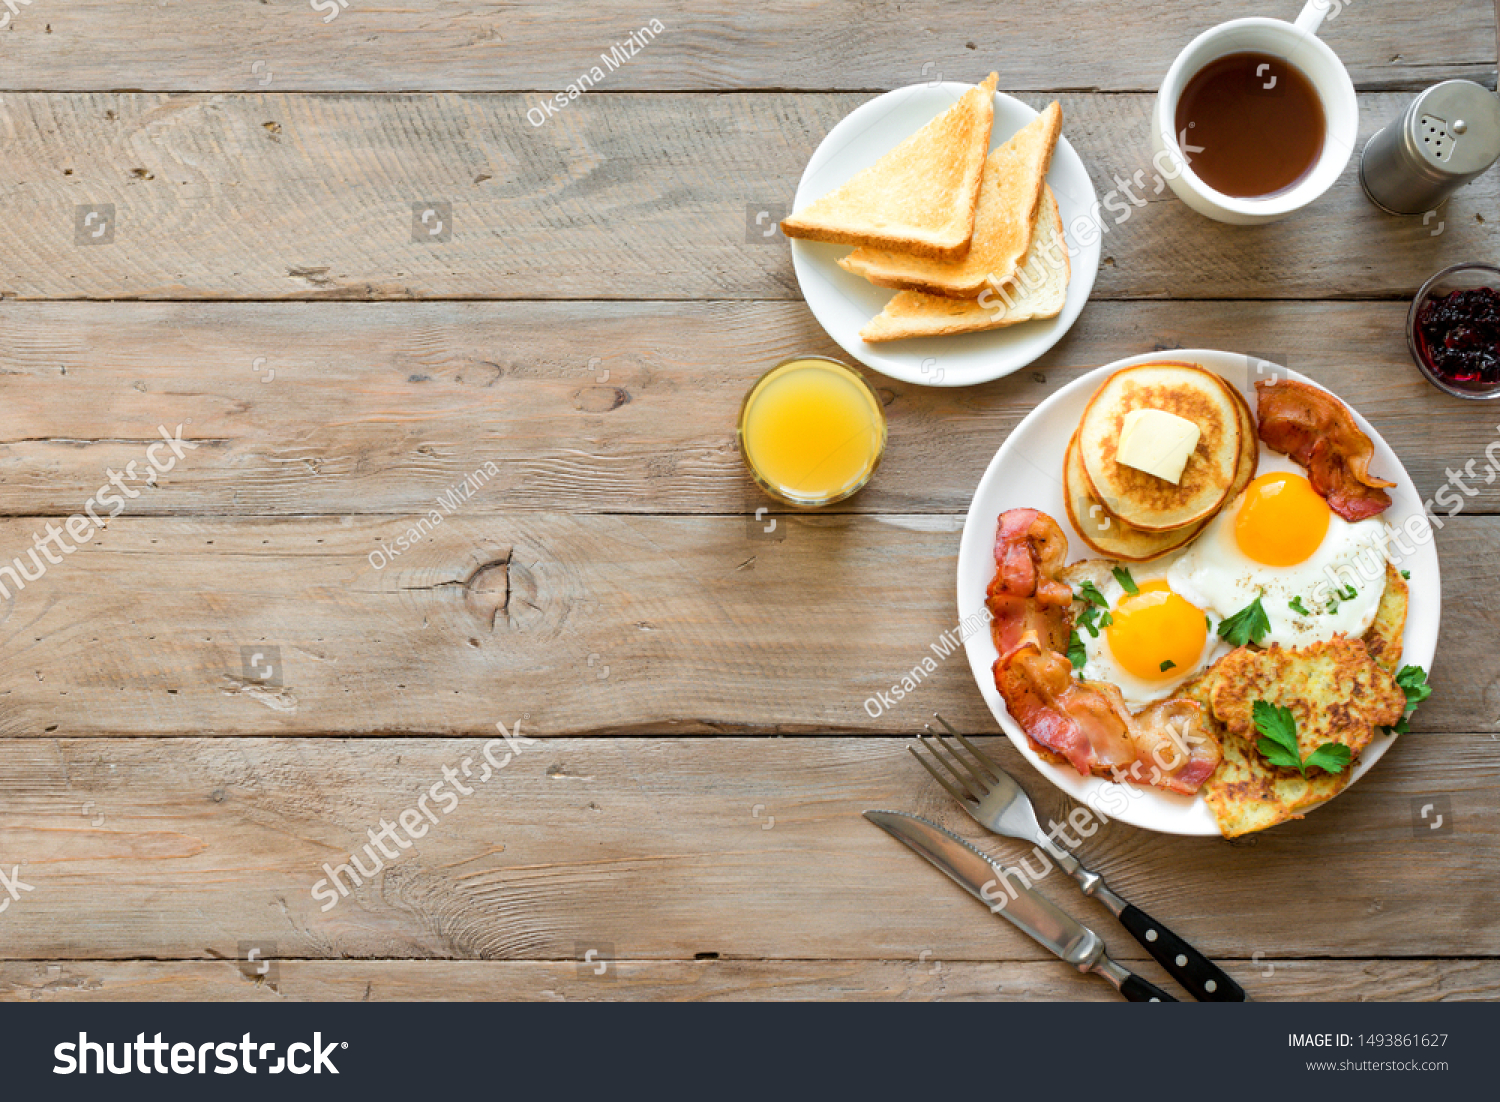 Full American Breakfast on wooden, top view, copy space. Sunny side fried eggs, roasted bacon, hash brown, pancakes, orange juice and coffee for breakfast. #1493861627